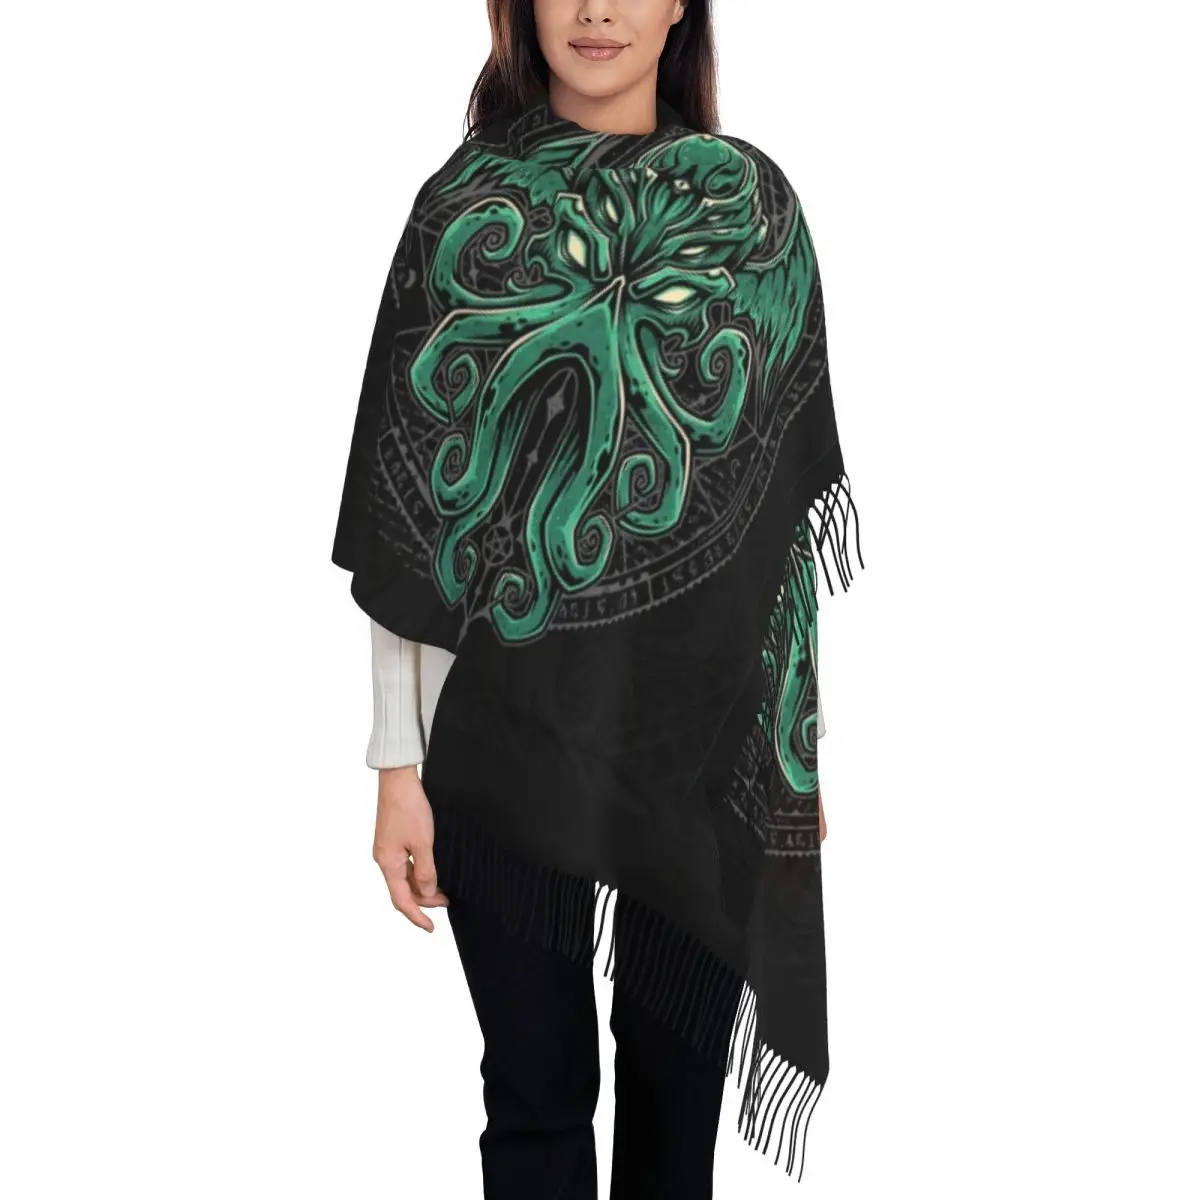 

Ladies Large Lovecraft Great Cthulhu Scarves Women Winter Soft Warm Tassel Shawl Wraps Horror Monster Octopus Tentacle Scarf